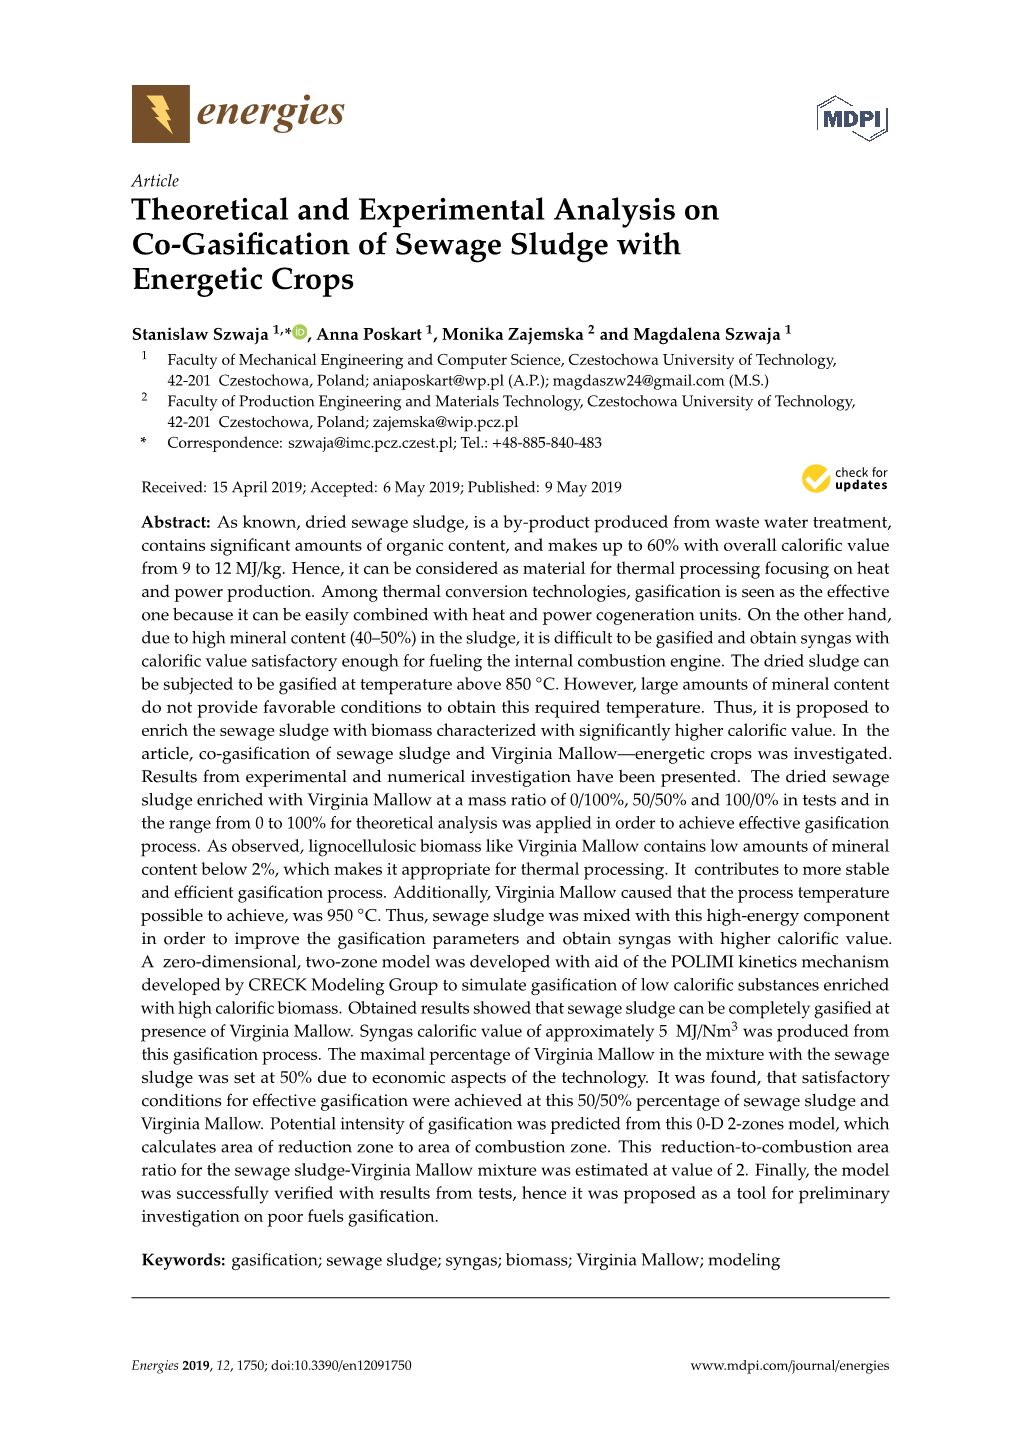 Theoretical and Experimental Analysis on Co-Gasification of Sewage